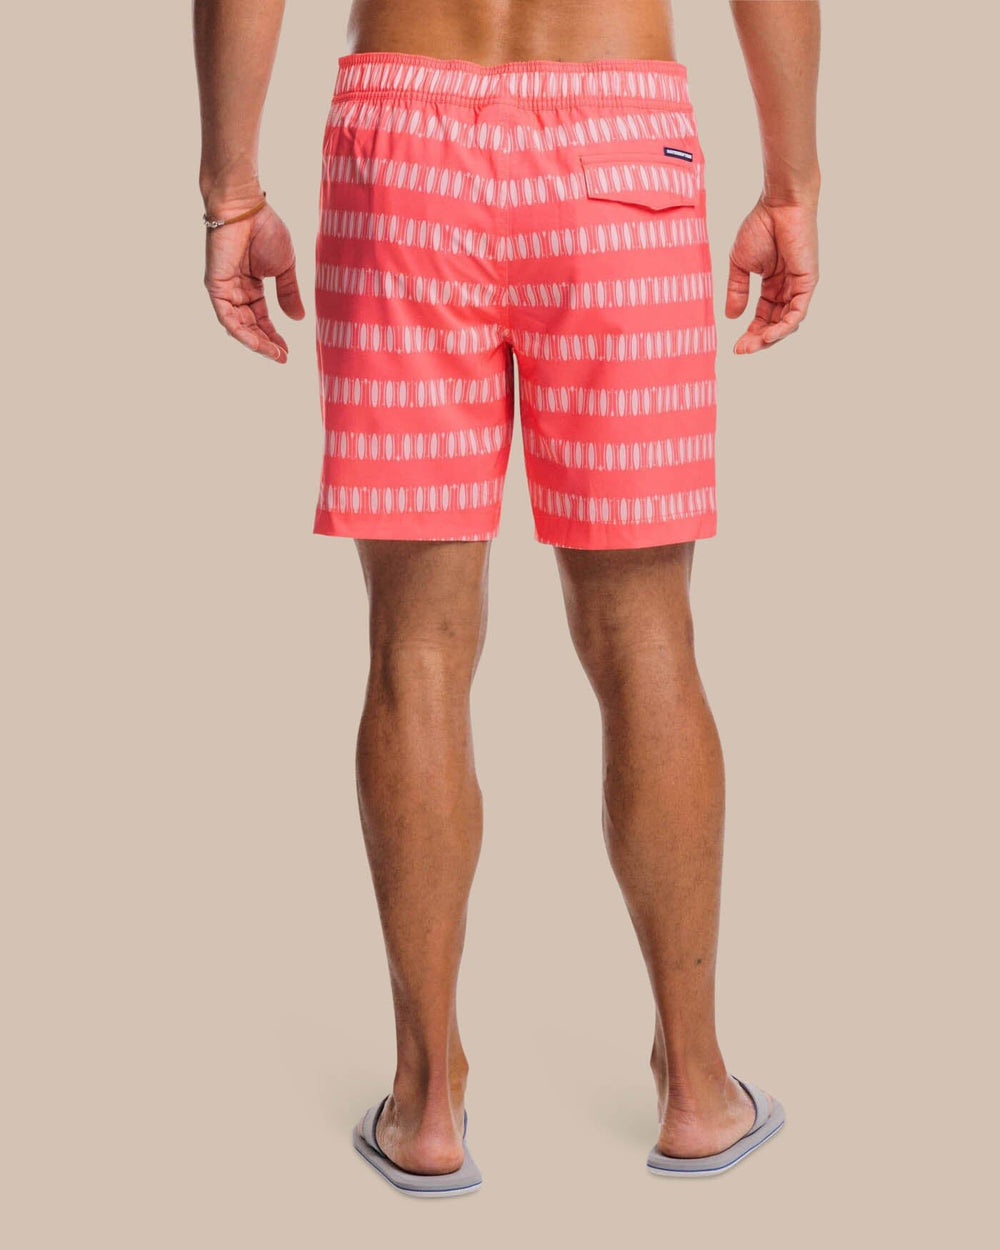 The back view of the Southern Tide Paddlin Out Printed Swim Short by Southern Tide - Sunkist Coral